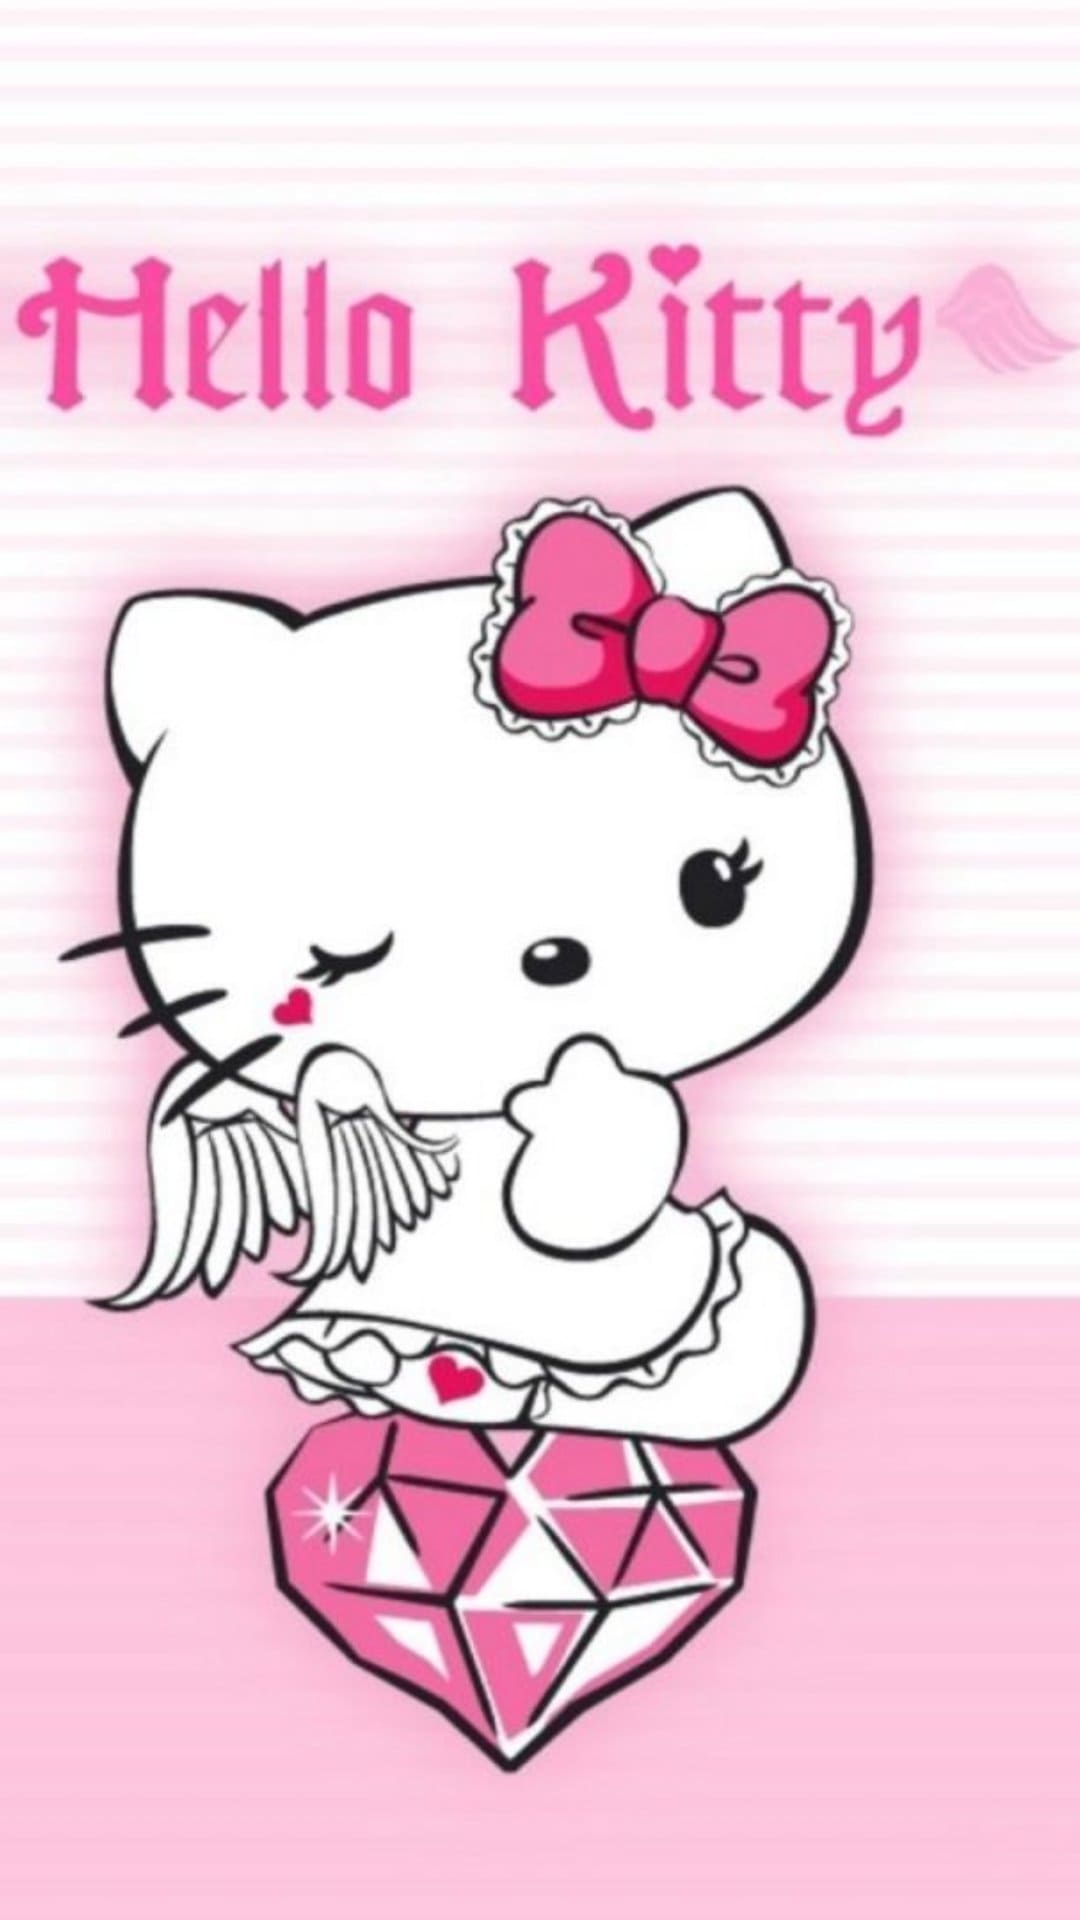 Hello Kitty images hd